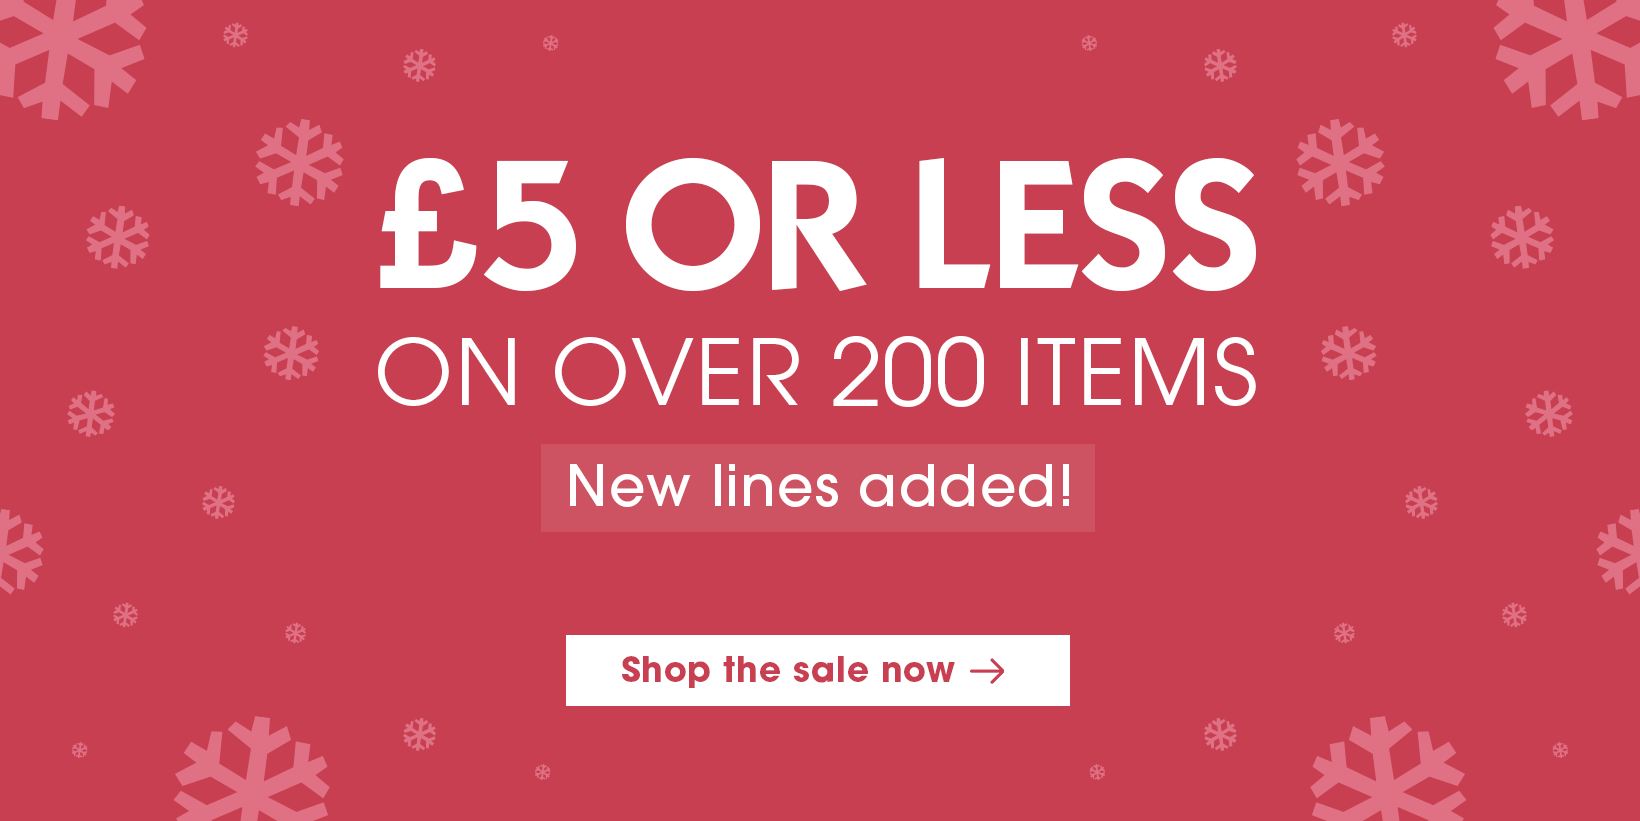 Winter Sale £5 or less on over 200 items, new line added! 